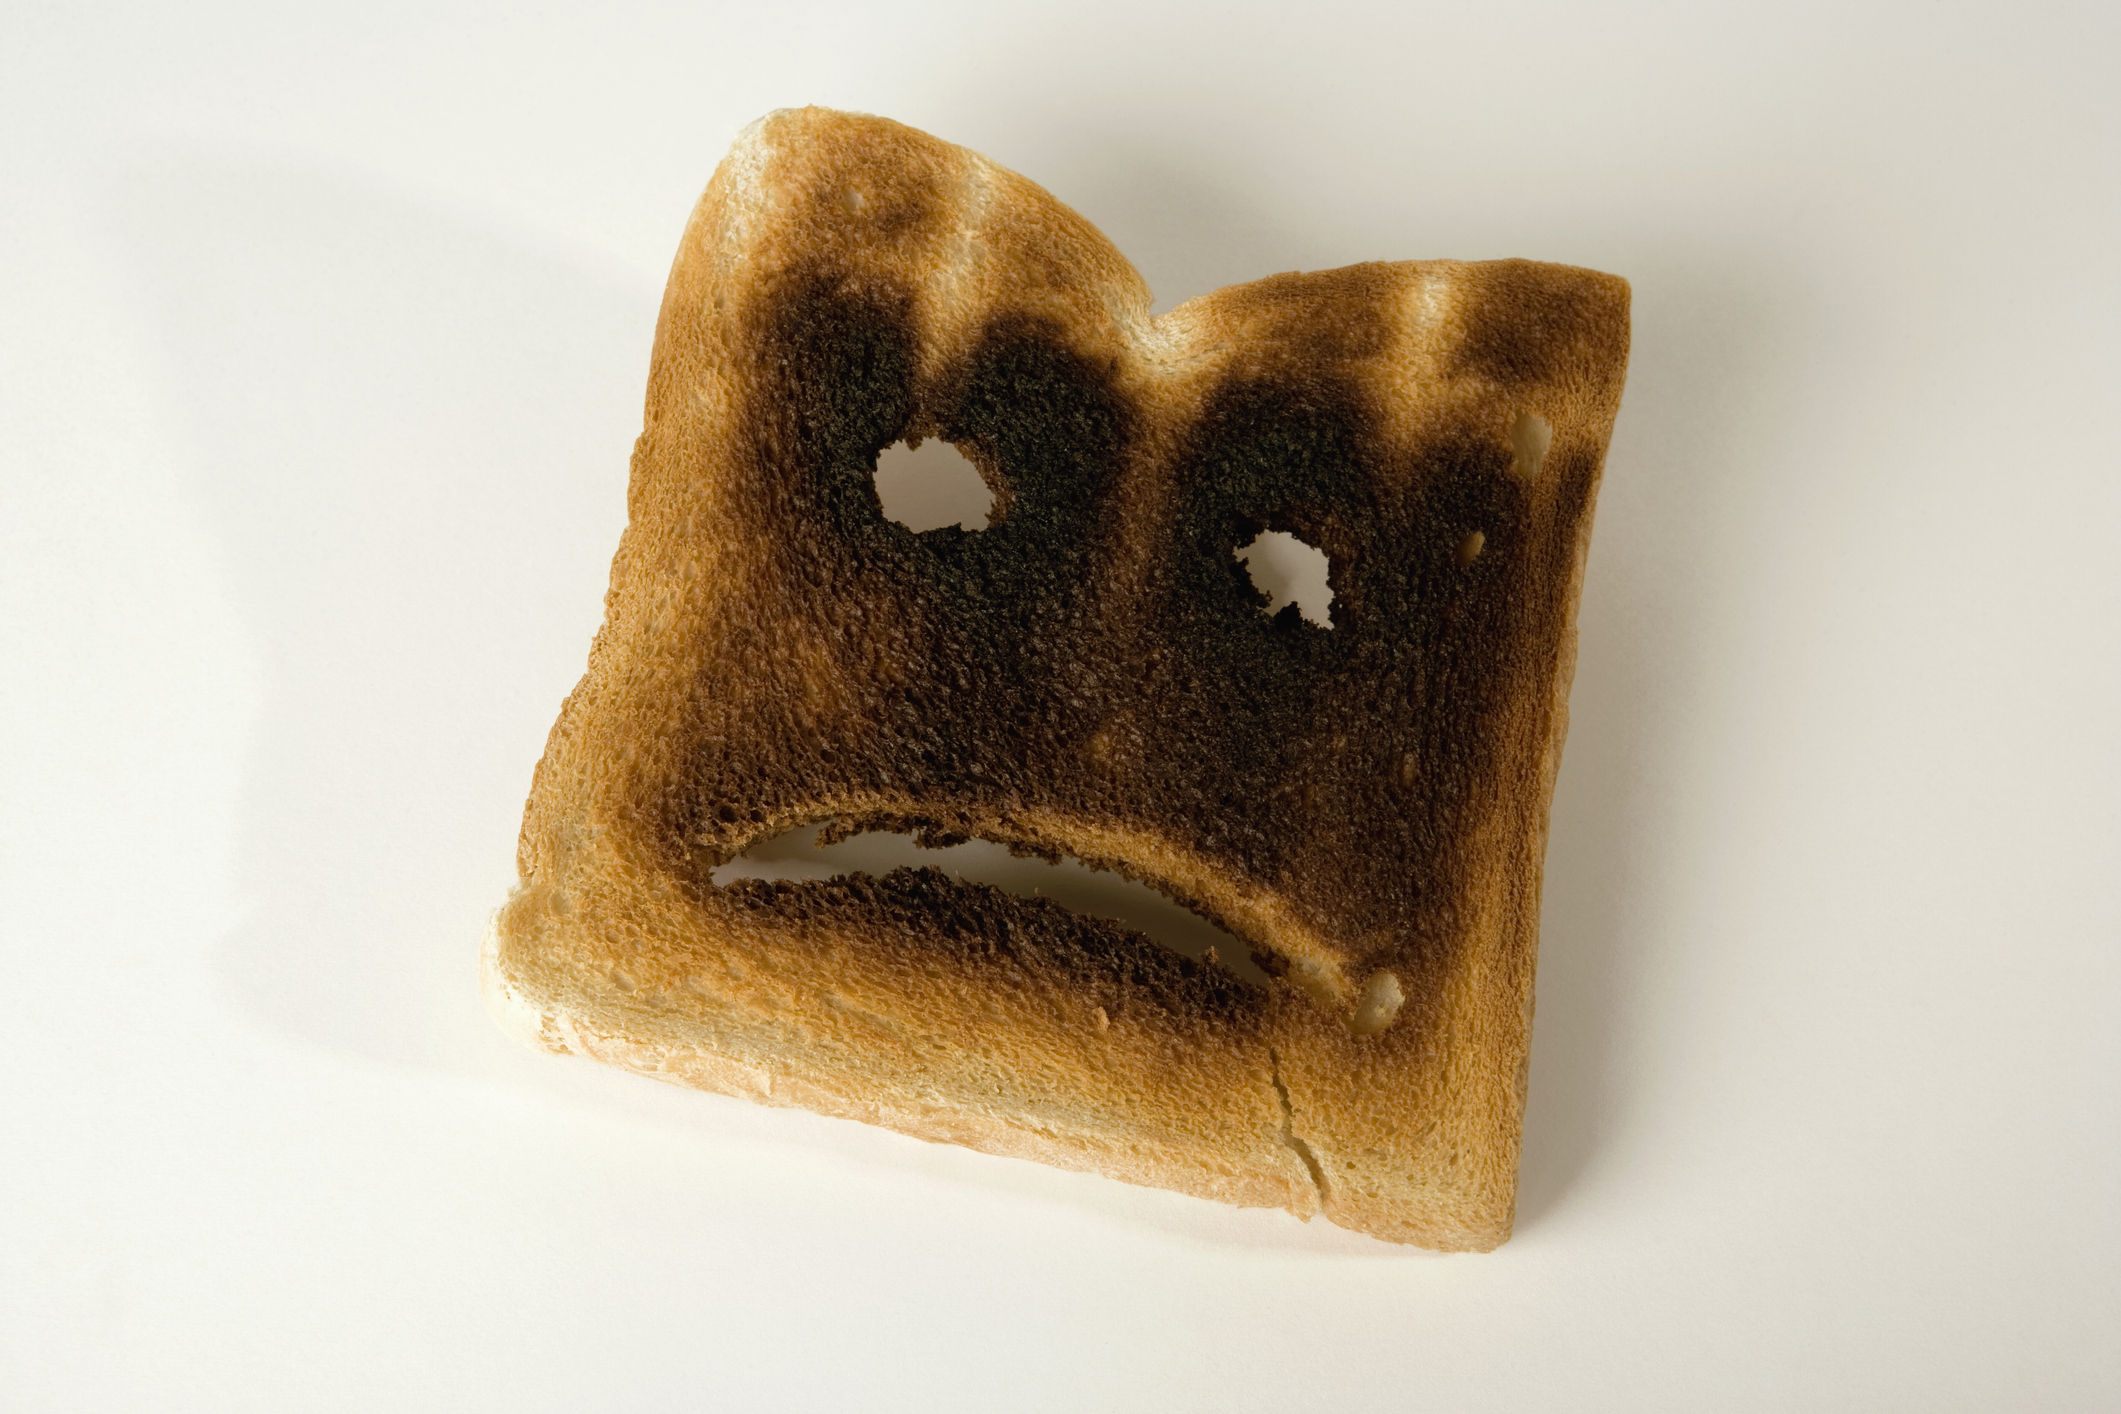 A slice of toast with a sad face;  Labor law mistakes